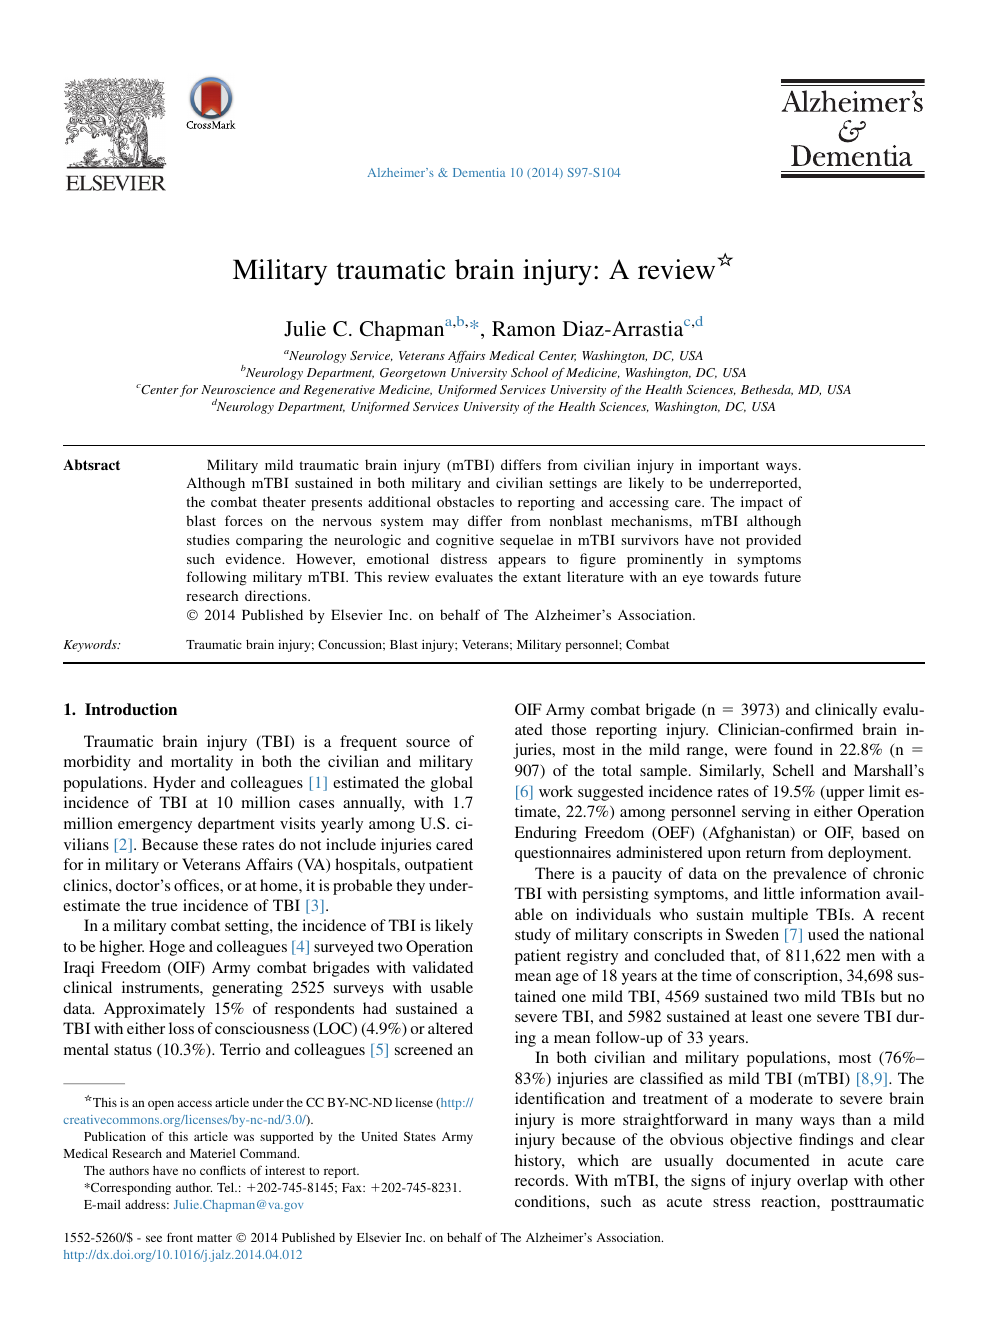 Military Traumatic Brain Injury A Review Topic Of Research Paper In Clinical Medicine Download Scholarly Article Pdf And Read For Free On Cyberleninka Open Science Hub